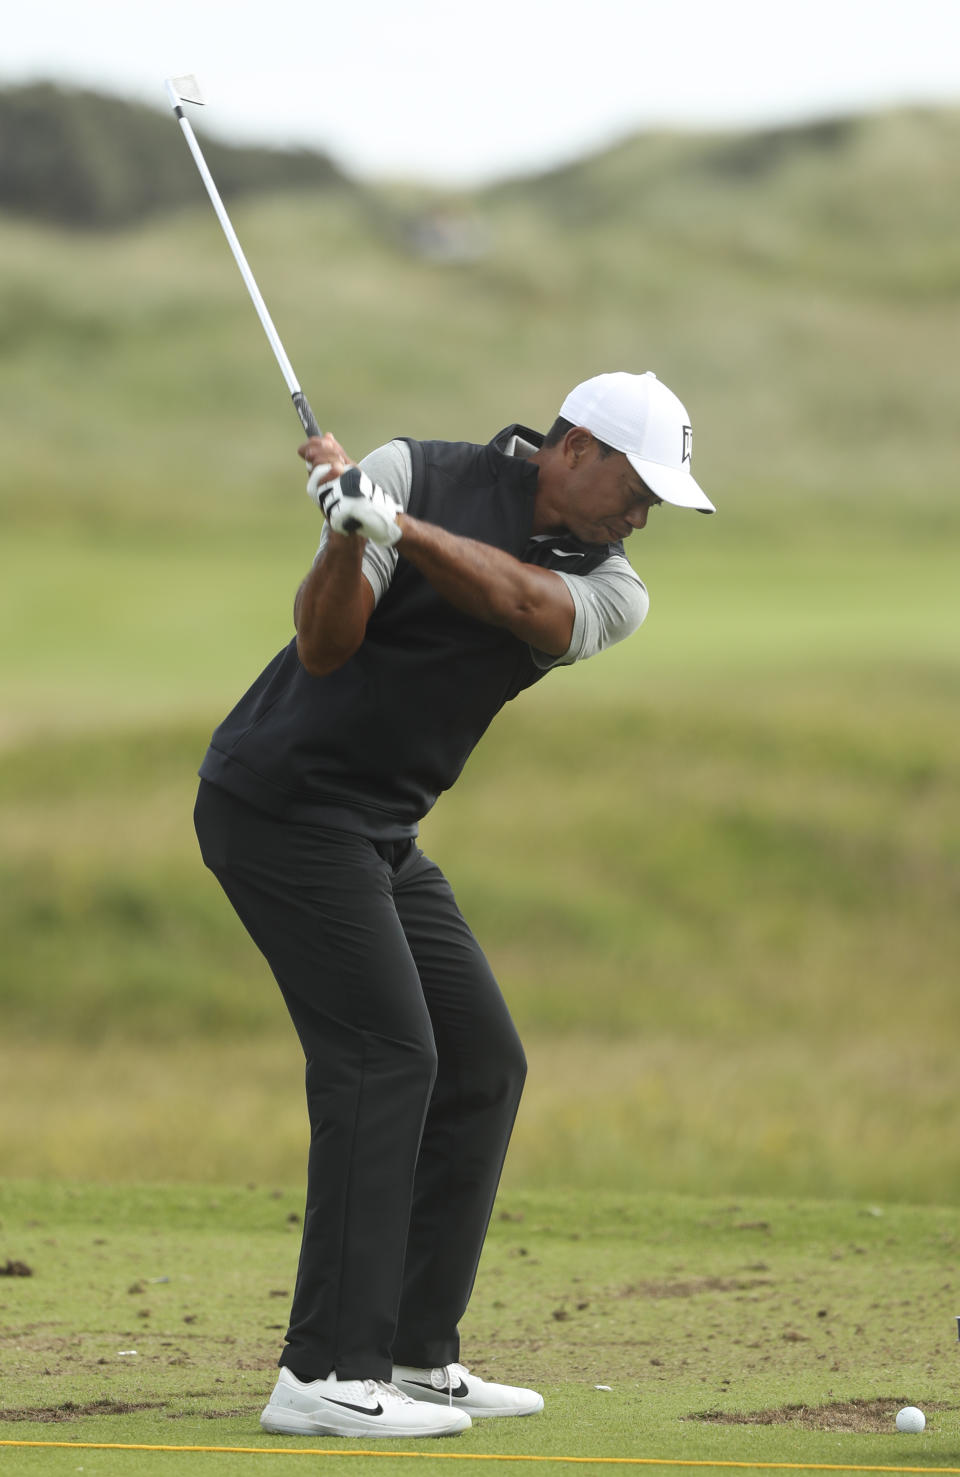 Tiger Woods of the United States hits a shot at the practice ground ahead of the start of the British Open golf championships at Royal Portrush in Northern Ireland, Tuesday, July 16, 2019. The British Open starts Thursday. (AP Photo/Jon Super)